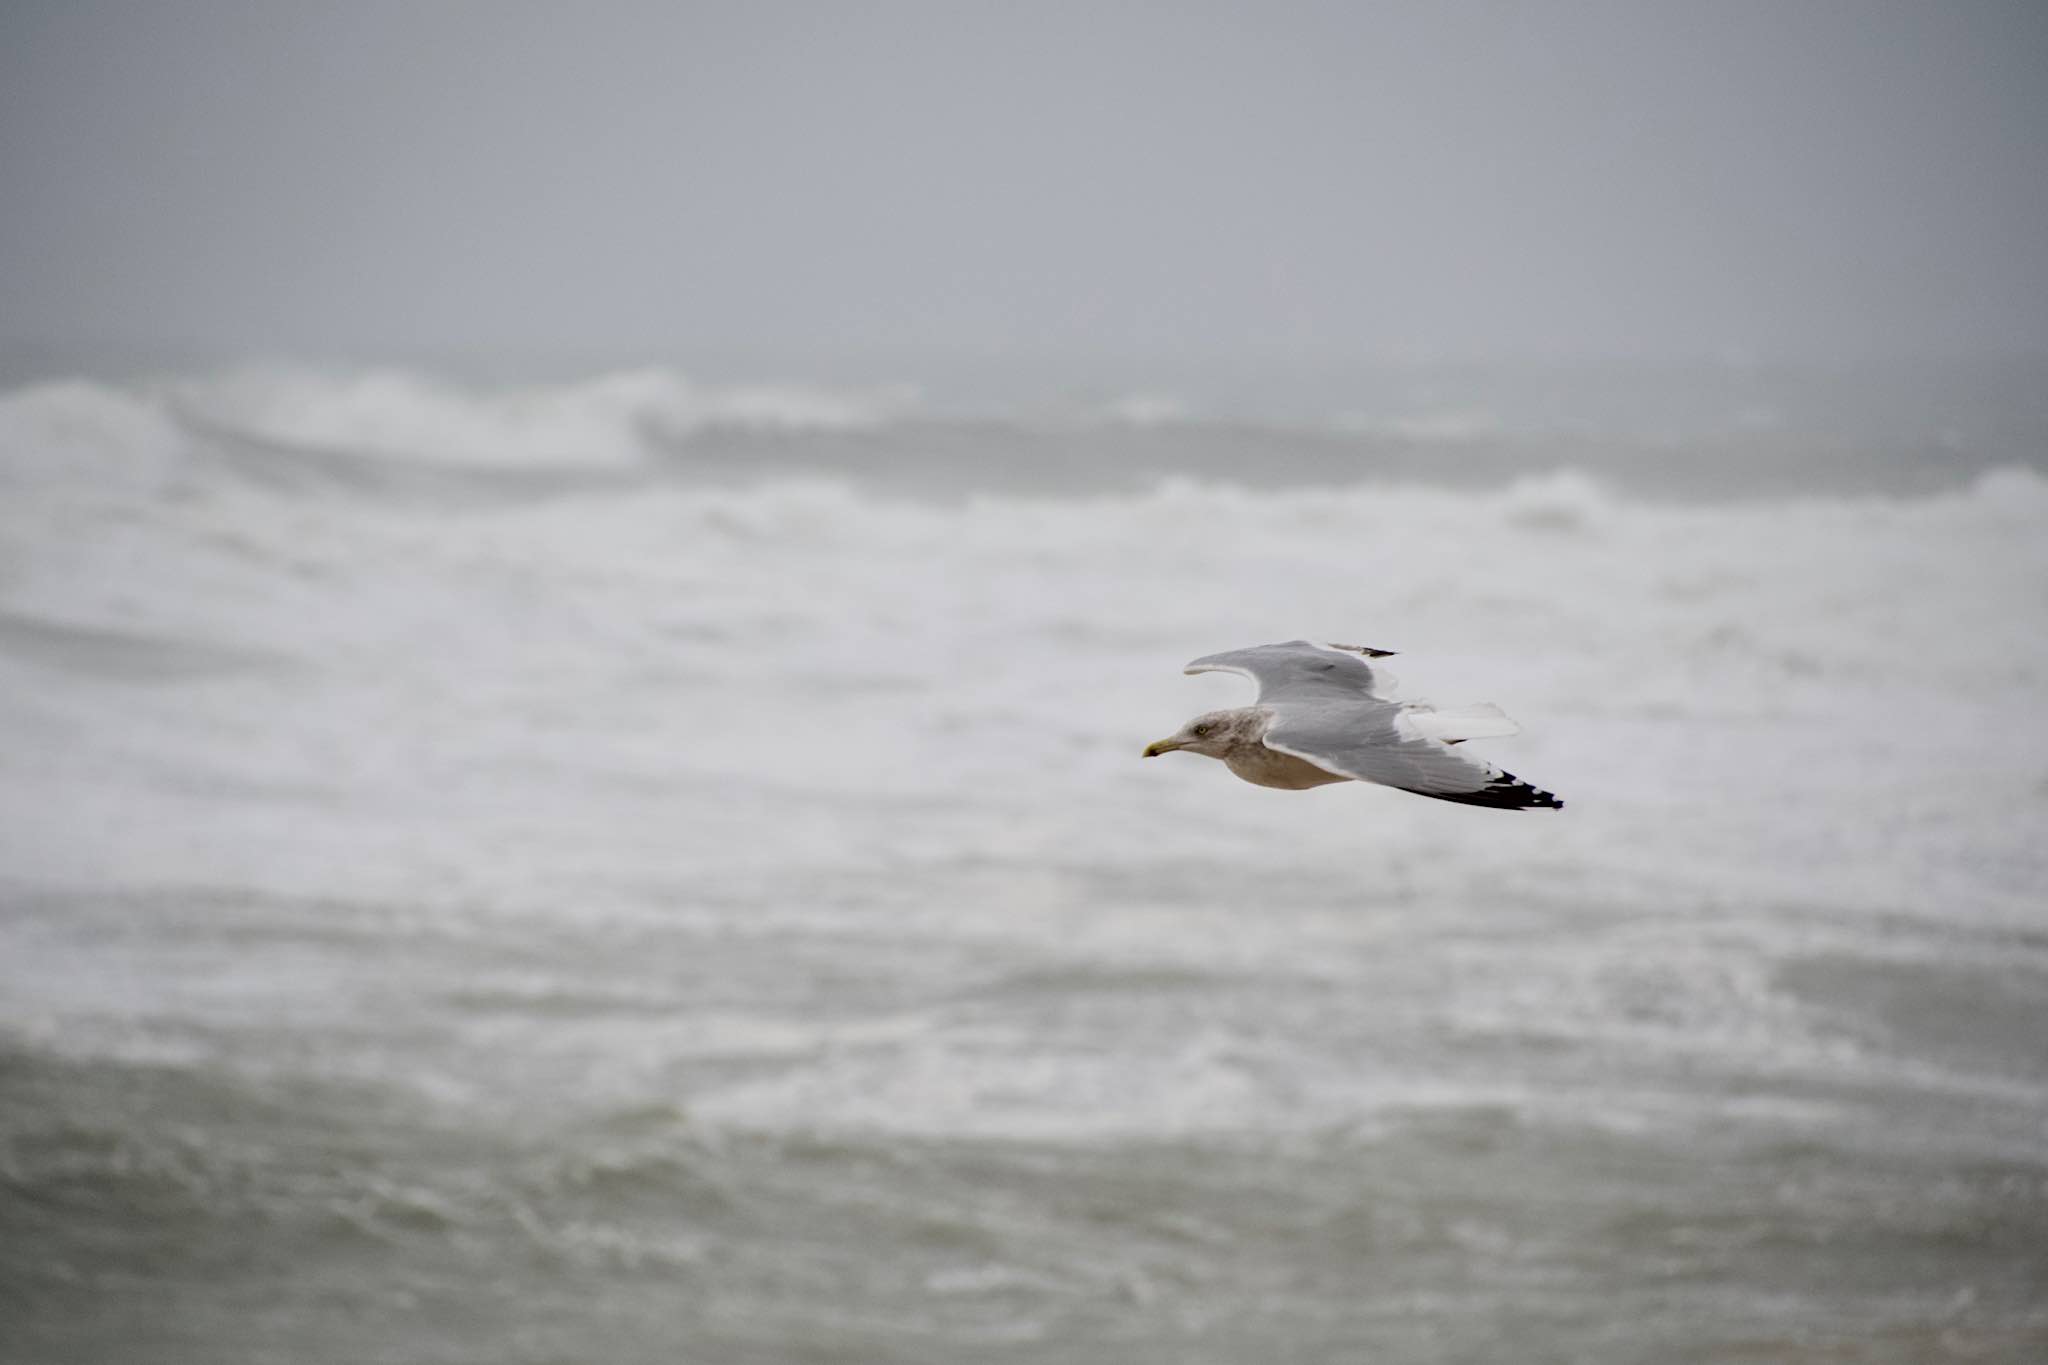 A Seagull soaring over the waves